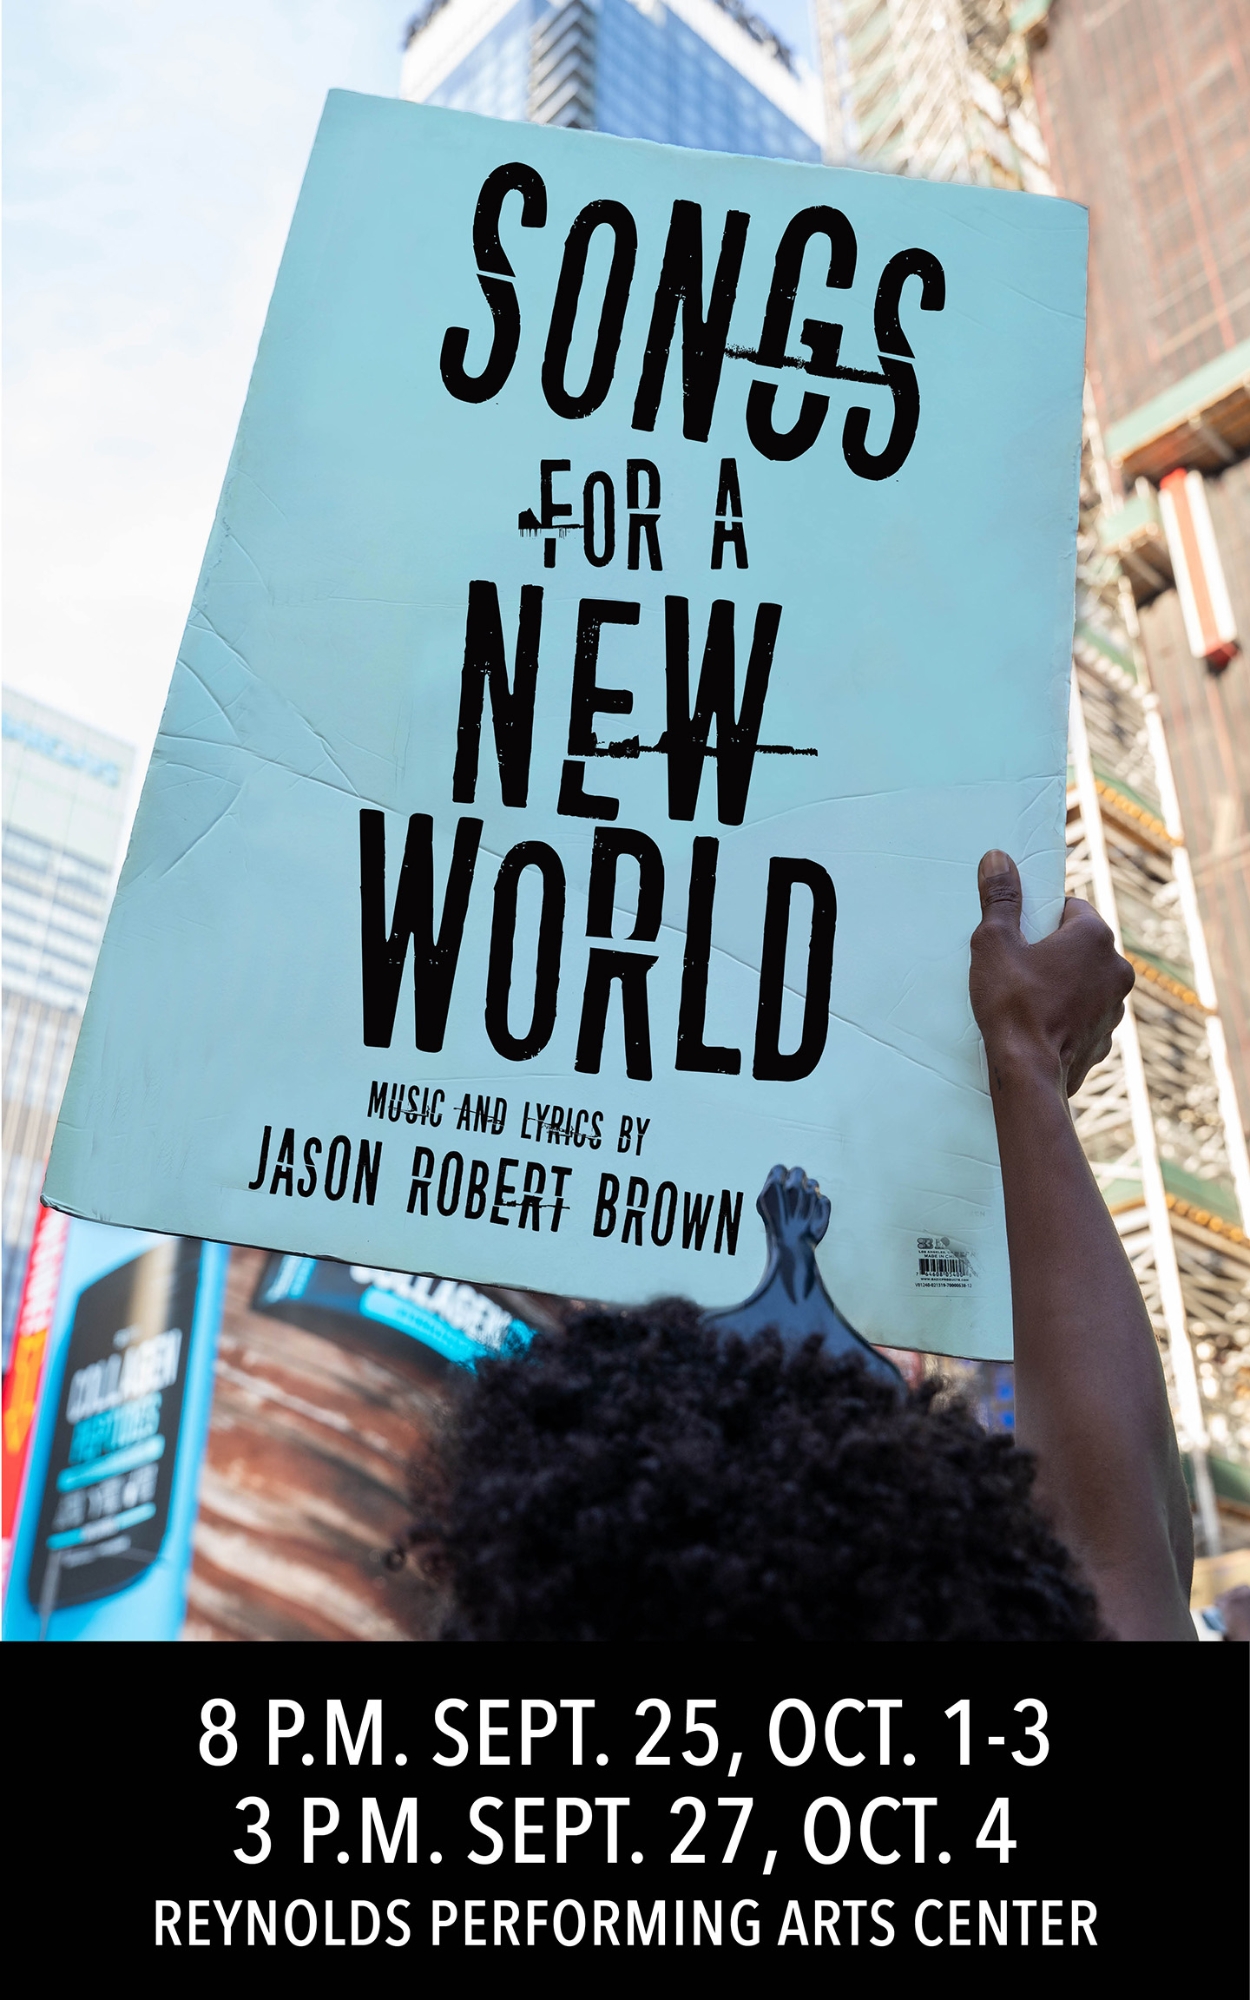 Songs for a New World. Music and lyrics by Jason Robert Brown. 8 P.M. Sept. 25, Oct. 1-3; 3 P.M. Sept. 27, Oct. 4. Reynolds Performing Arts Center.